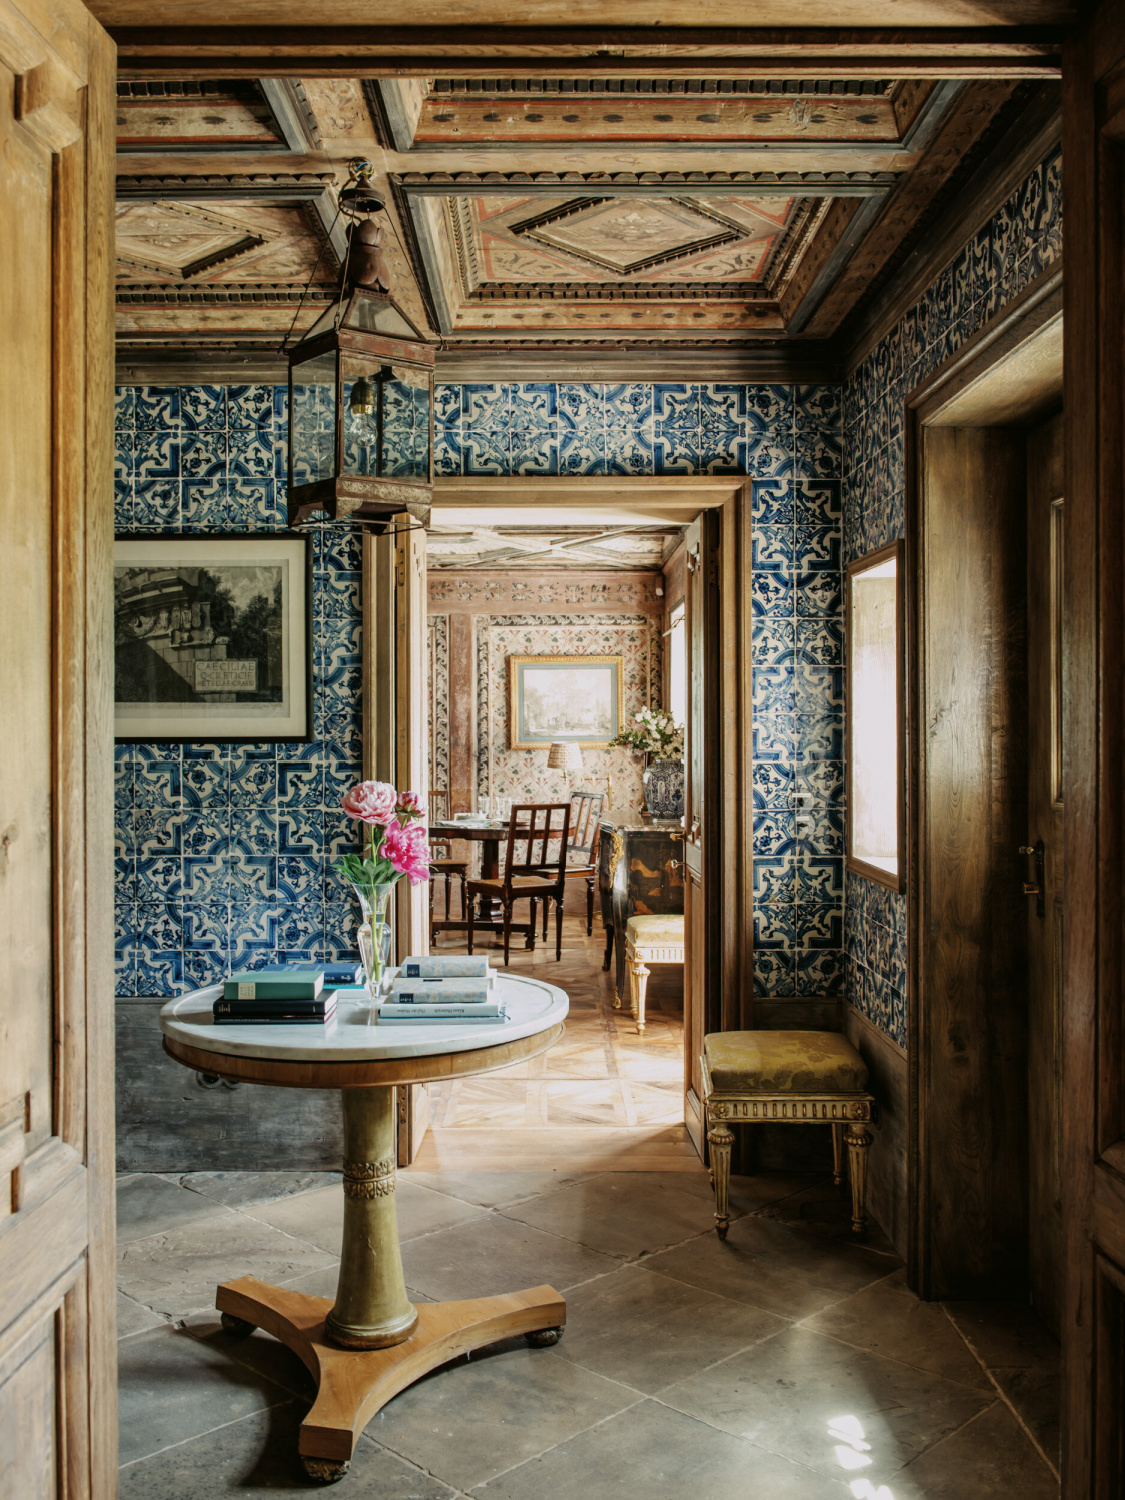 Studio Peregalli (photo: Robert Rieger) Old world style interior with impeccable timeless finishes and design. #oldworldstyle #europeancountry #sophisticatedinteriors